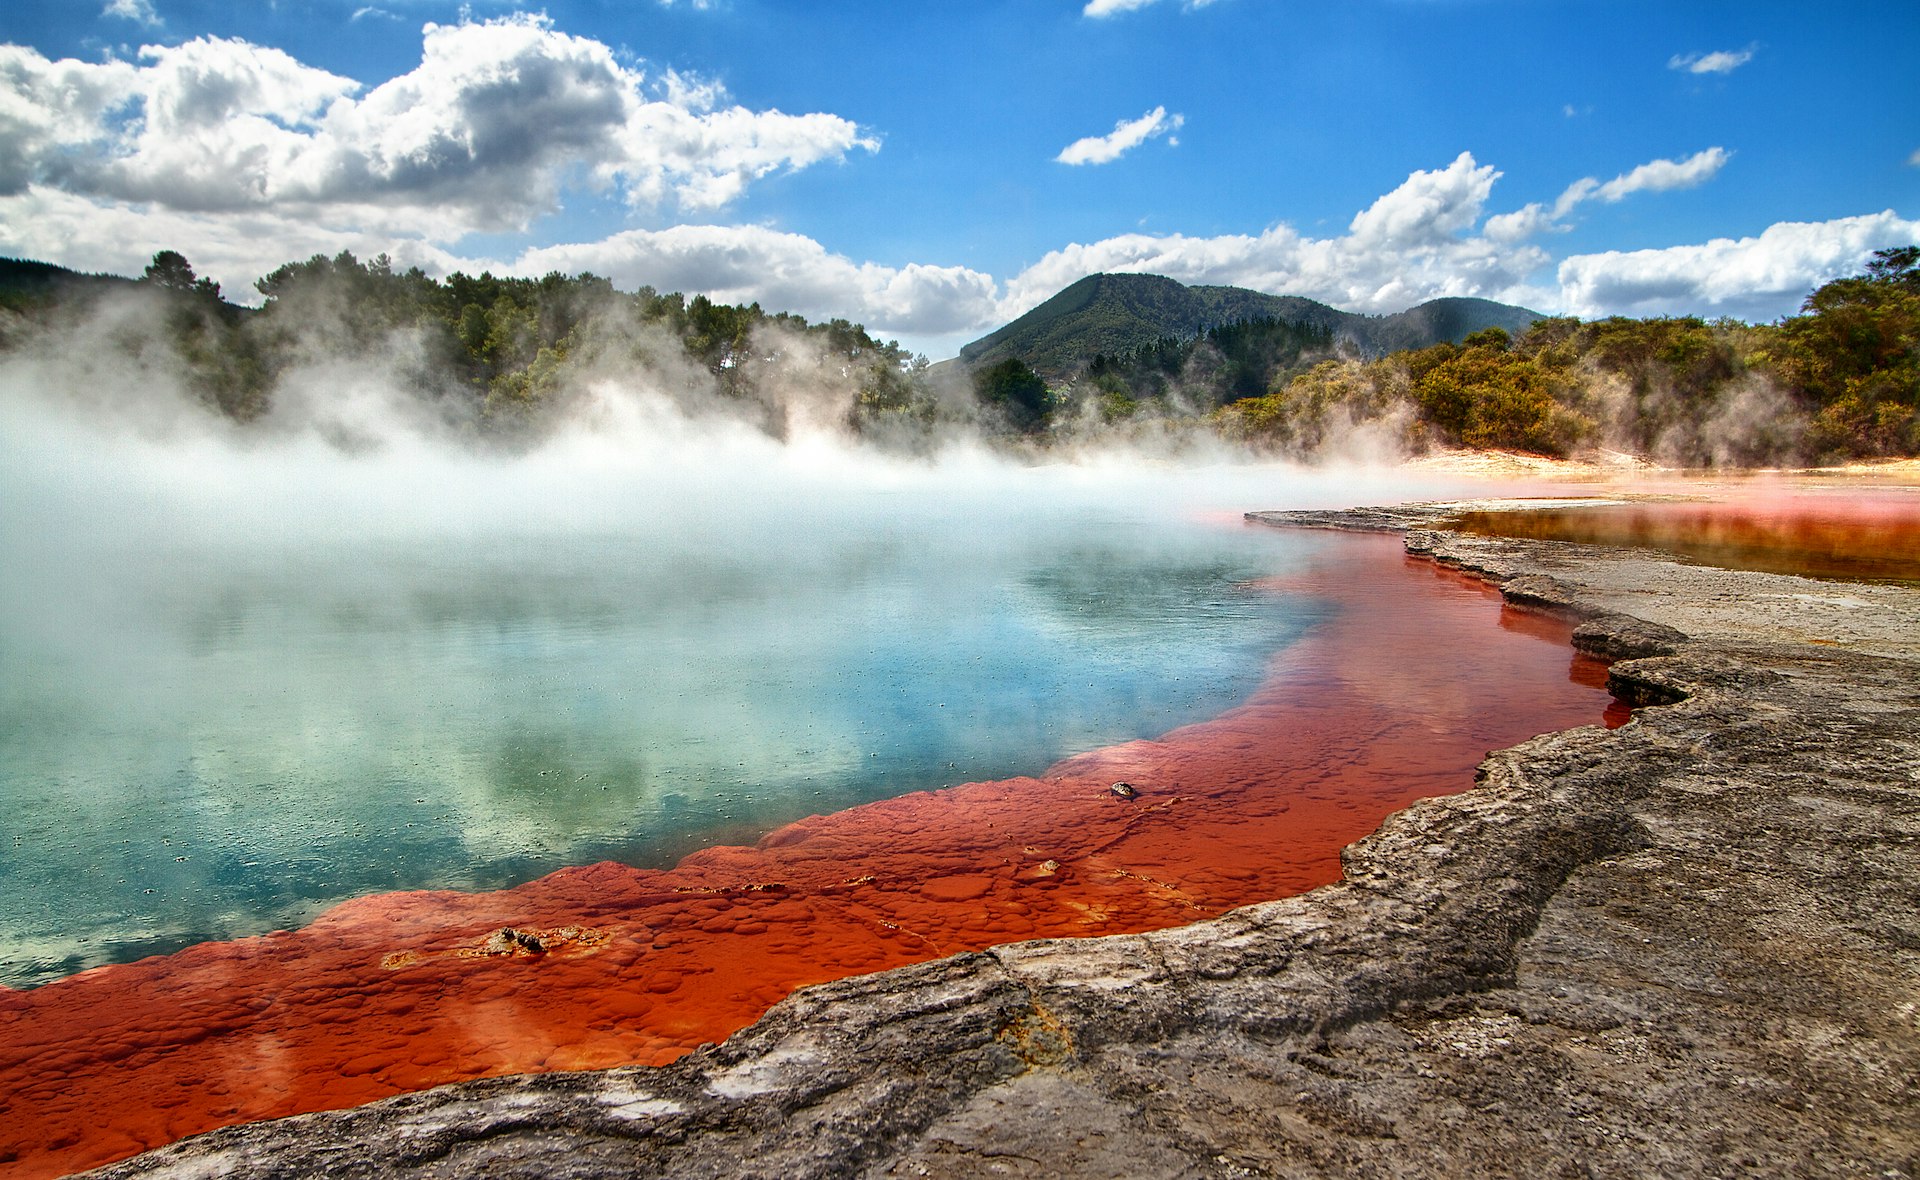 Features - Steam rising off a geo-thermal pool